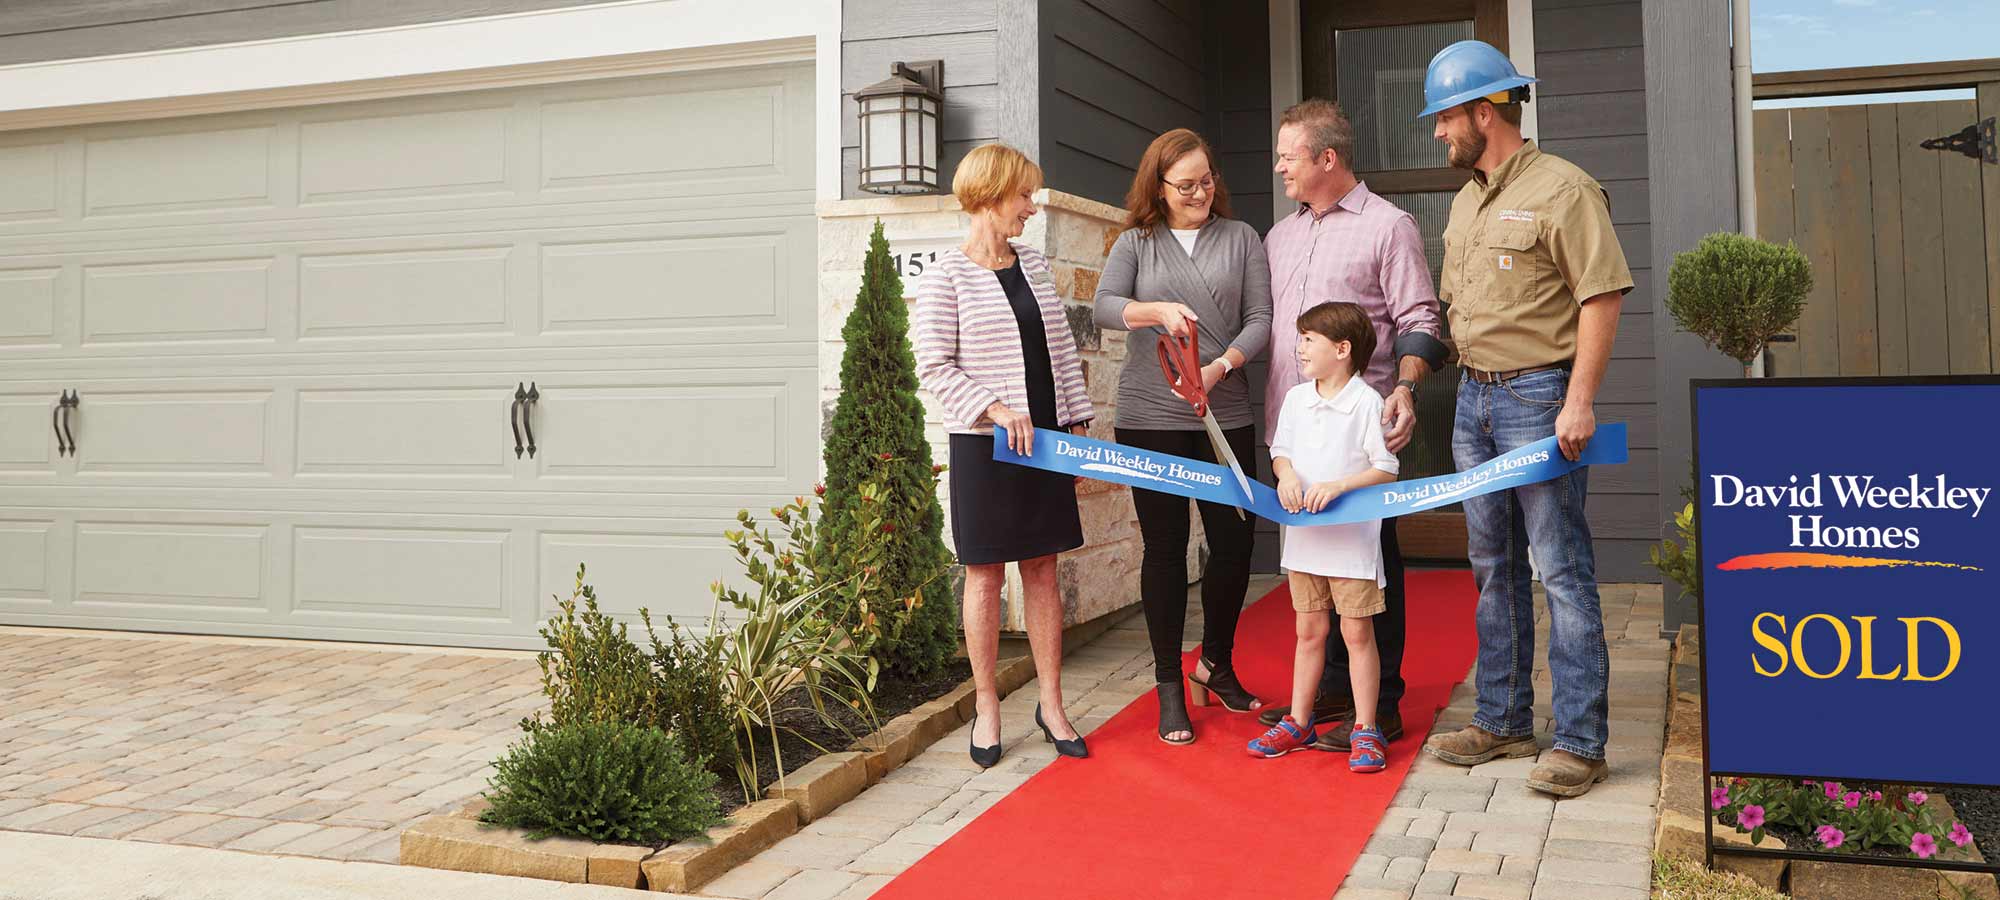 A David Weekley Homes Sales Consultant and Personal Builder welcome a family to their new home